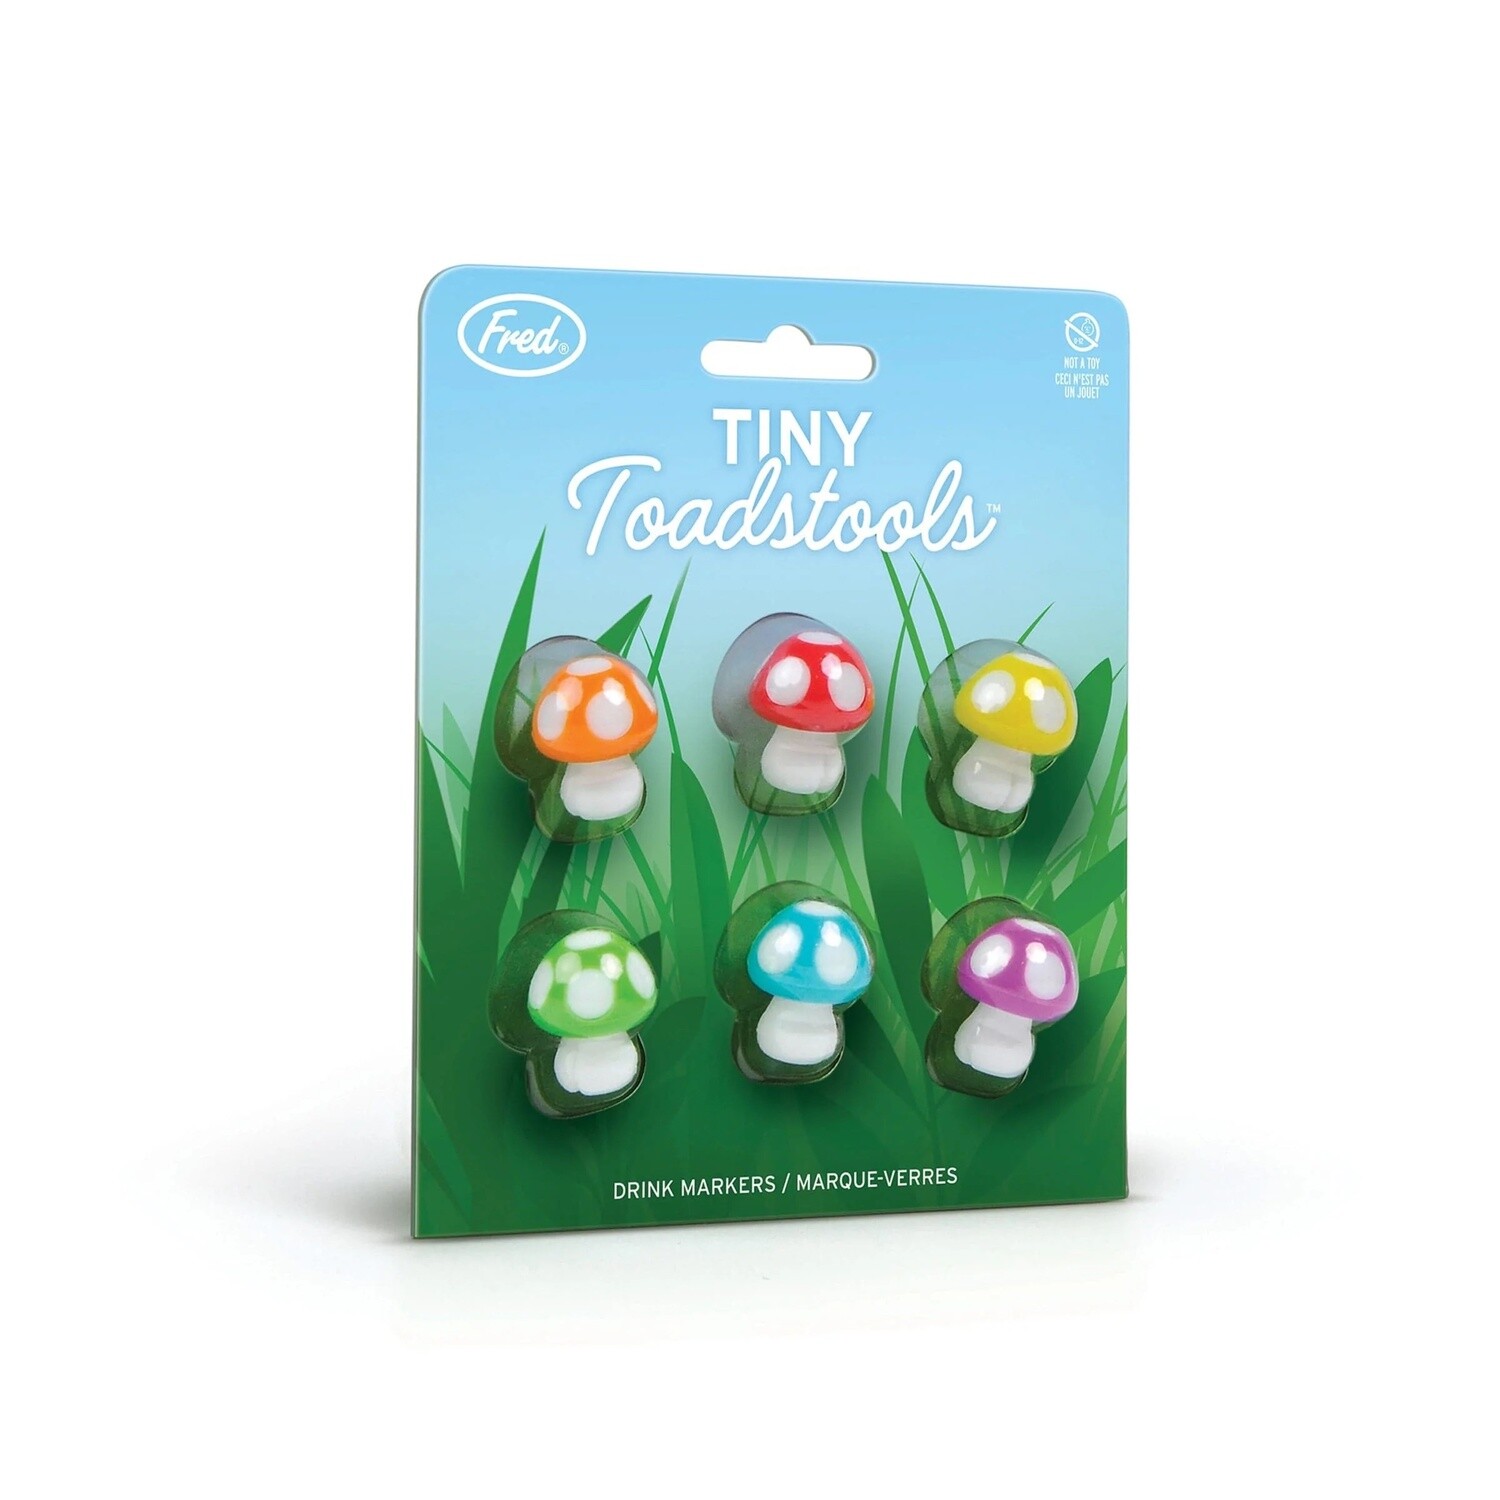 Tiny Toadstools Drink Charms S/6